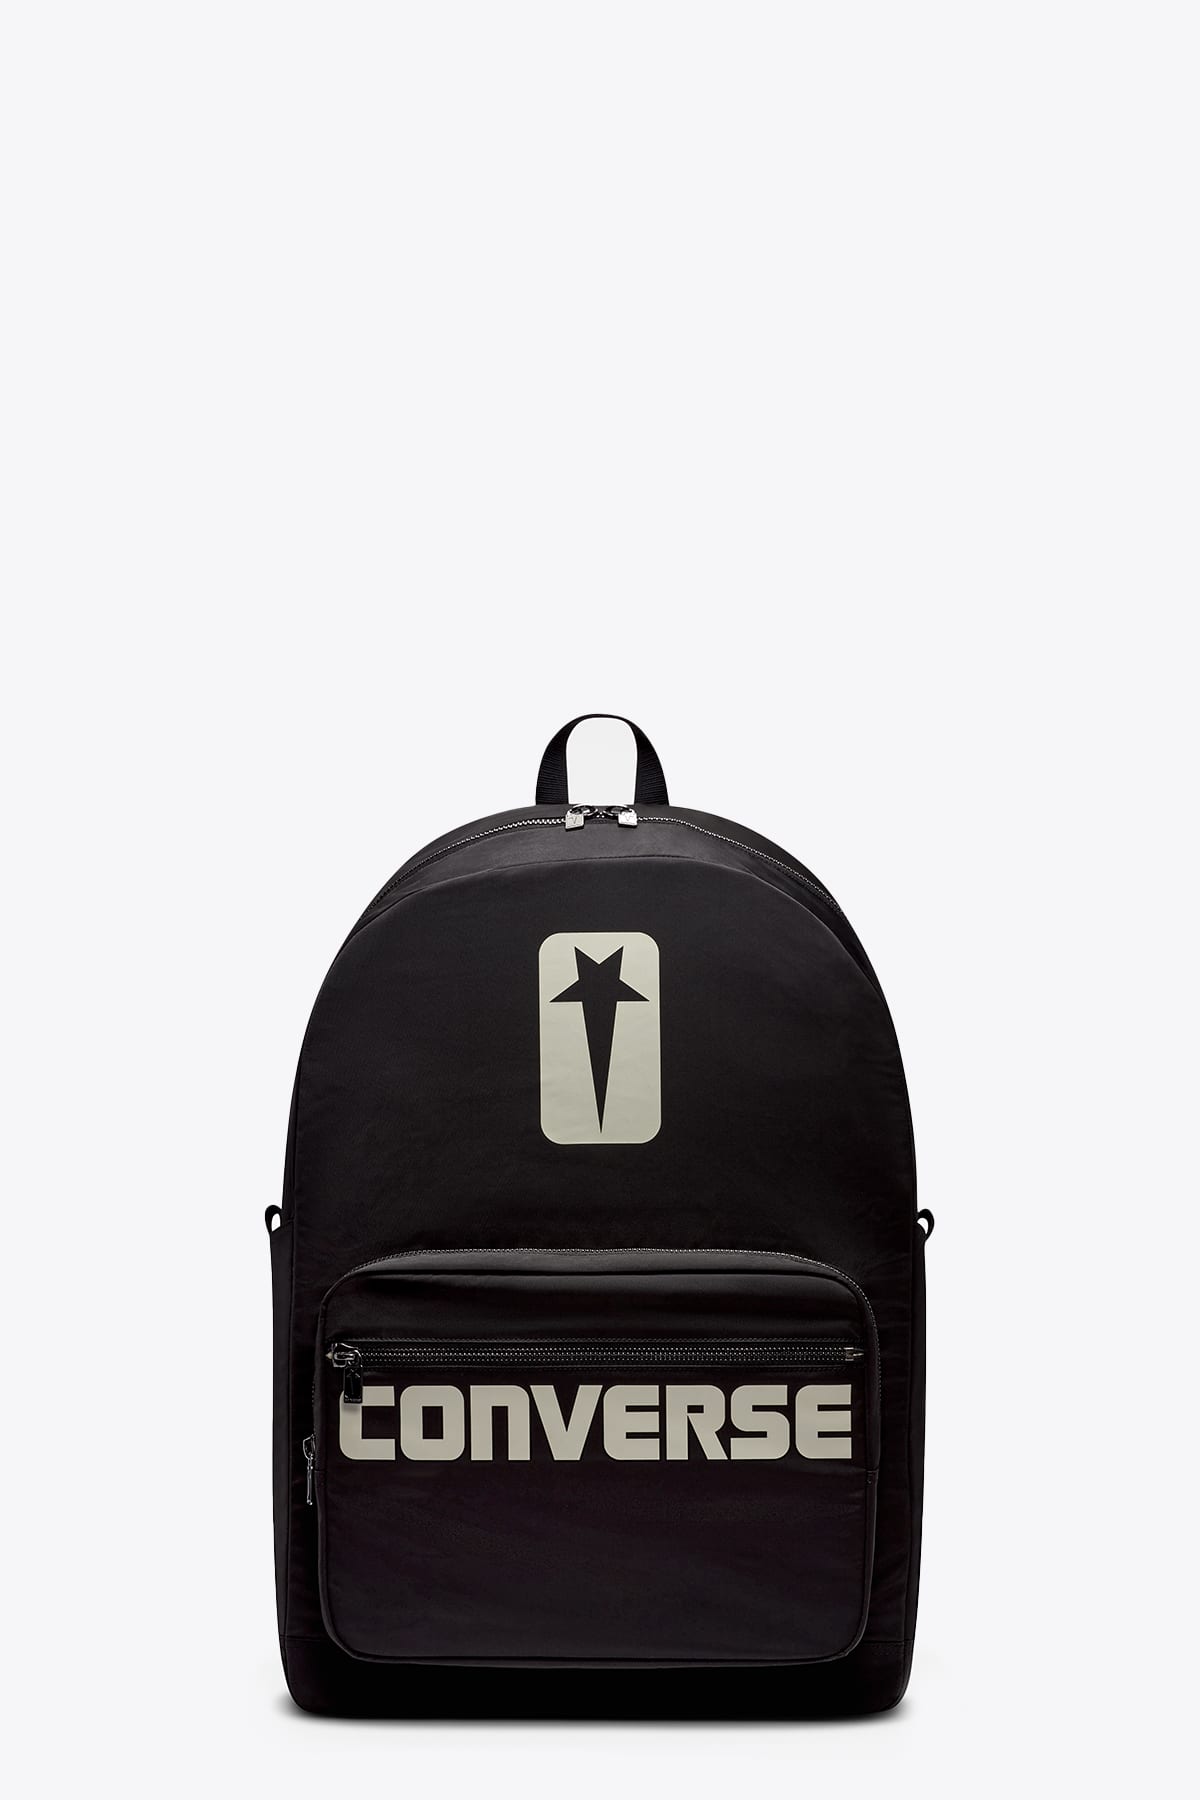 Oversized Backpack Oversized backpack offical collaboration Converse x DRKSHDW